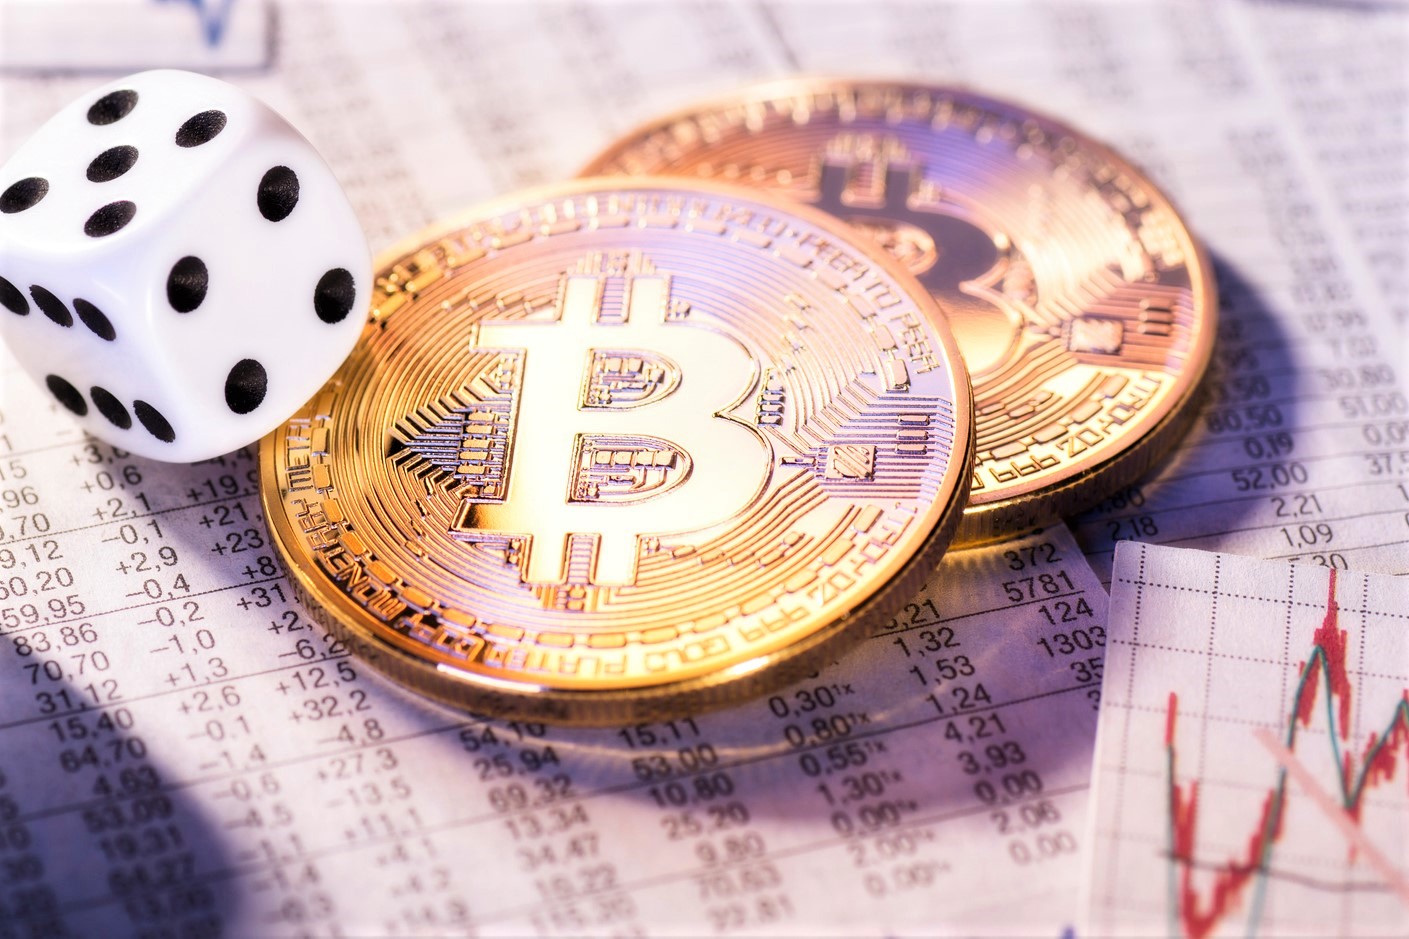 How to Bet on Bitcoin Volatility Using Bitcoin Options